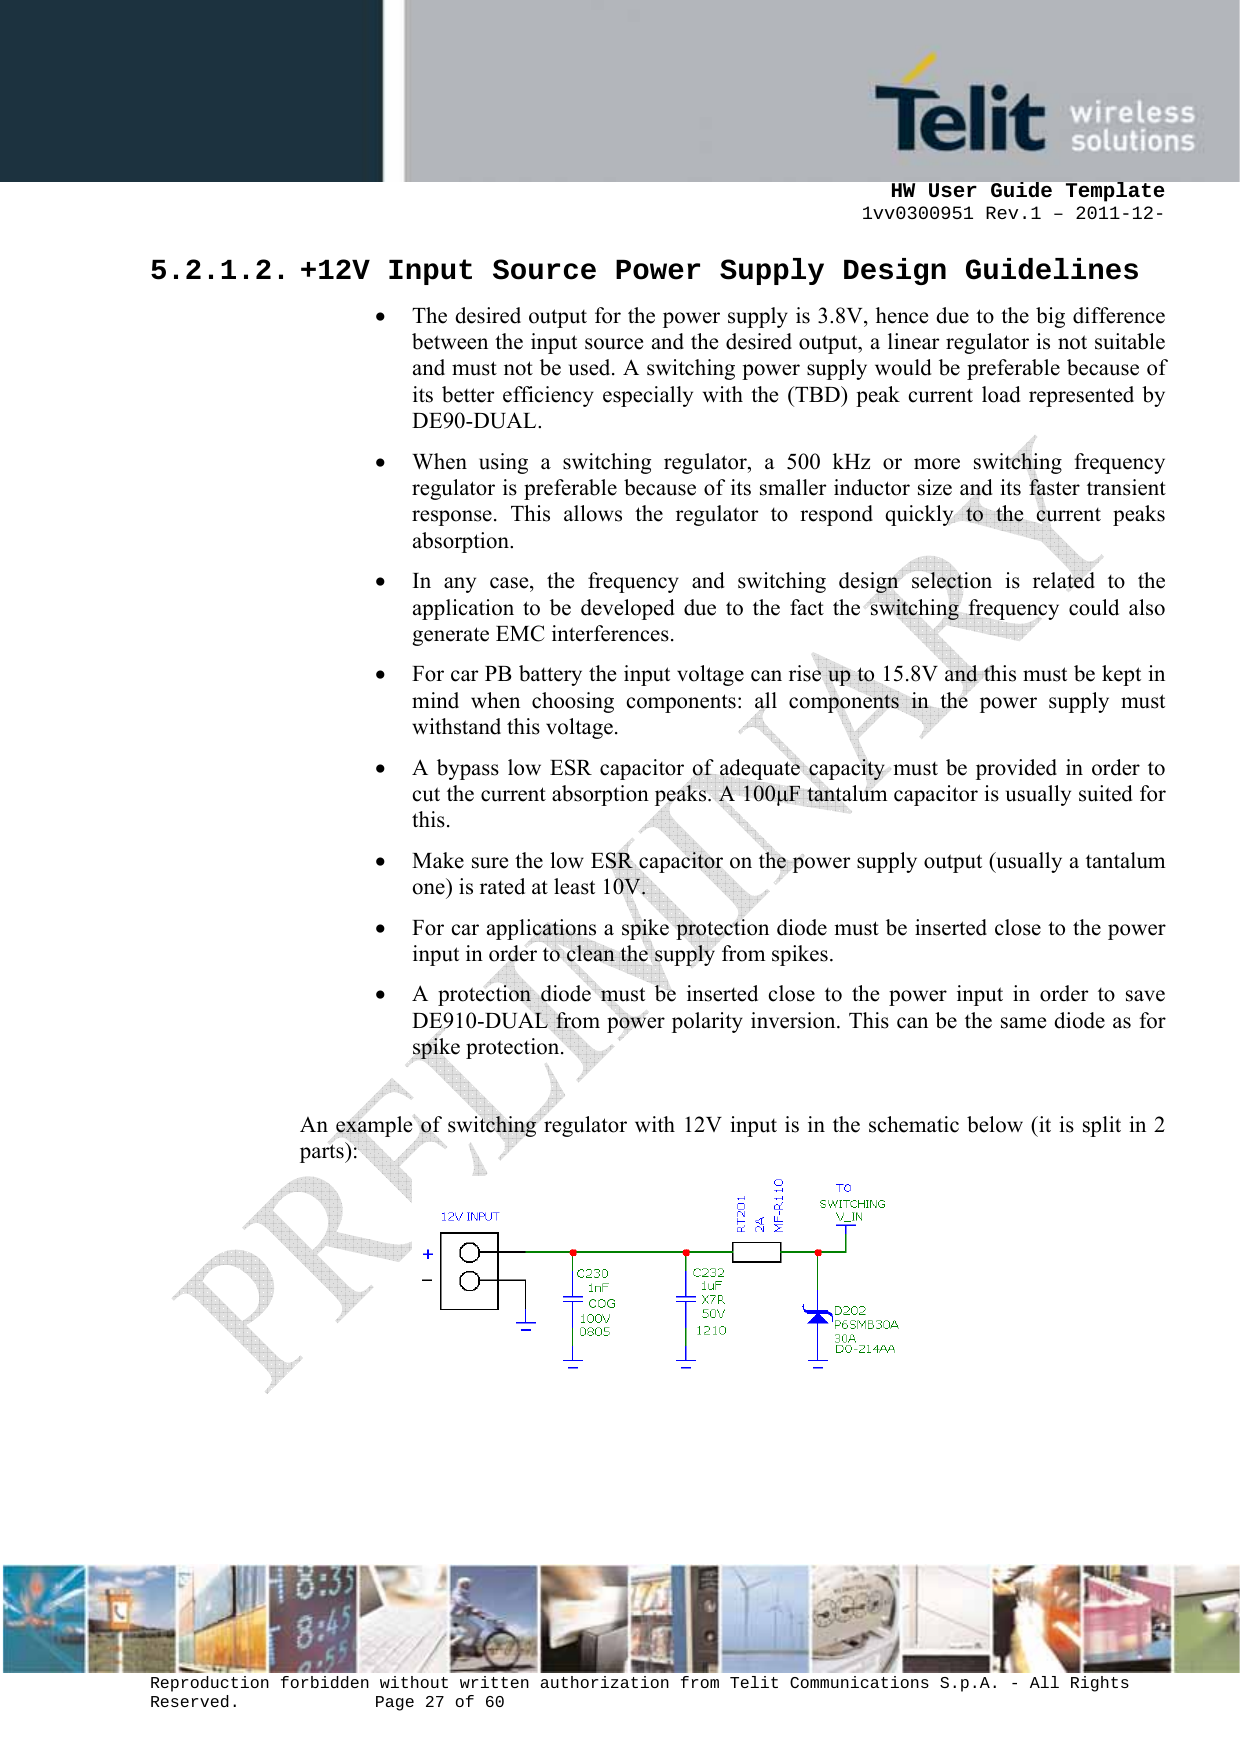      HW User Guide Template 1vv0300951 Rev.1 – 2011-12-  Reproduction forbidden without written authorization from Telit Communications S.p.A. - All Rights Reserved.    Page 27 of 60                                                     5.2.1.2. +12V Input Source Power Supply Design Guidelines • The desired output for the power supply is 3.8V, hence due to the big difference between the input source and the desired output, a linear regulator is not suitable and must not be used. A switching power supply would be preferable because of its better efficiency especially with the (TBD) peak current load represented by DE90-DUAL. • When using a switching regulator, a 500 kHz or more switching frequency regulator is preferable because of its smaller inductor size and its faster transient response. This allows the regulator to respond quickly to the current peaks absorption.  • In any case, the frequency and switching design selection is related to the application to be developed due to the fact the switching frequency could also generate EMC interferences. • For car PB battery the input voltage can rise up to 15.8V and this must be kept in mind when choosing components: all components in the power supply must withstand this voltage. • A bypass low ESR capacitor of adequate capacity must be provided in order to cut the current absorption peaks. A 100µF tantalum capacitor is usually suited for this. • Make sure the low ESR capacitor on the power supply output (usually a tantalum one) is rated at least 10V. • For car applications a spike protection diode must be inserted close to the power input in order to clean the supply from spikes.  • A protection diode must be inserted close to the power input in order to save DE910-DUAL from power polarity inversion. This can be the same diode as for spike protection.  An example of switching regulator with 12V input is in the schematic below (it is split in 2 parts):      